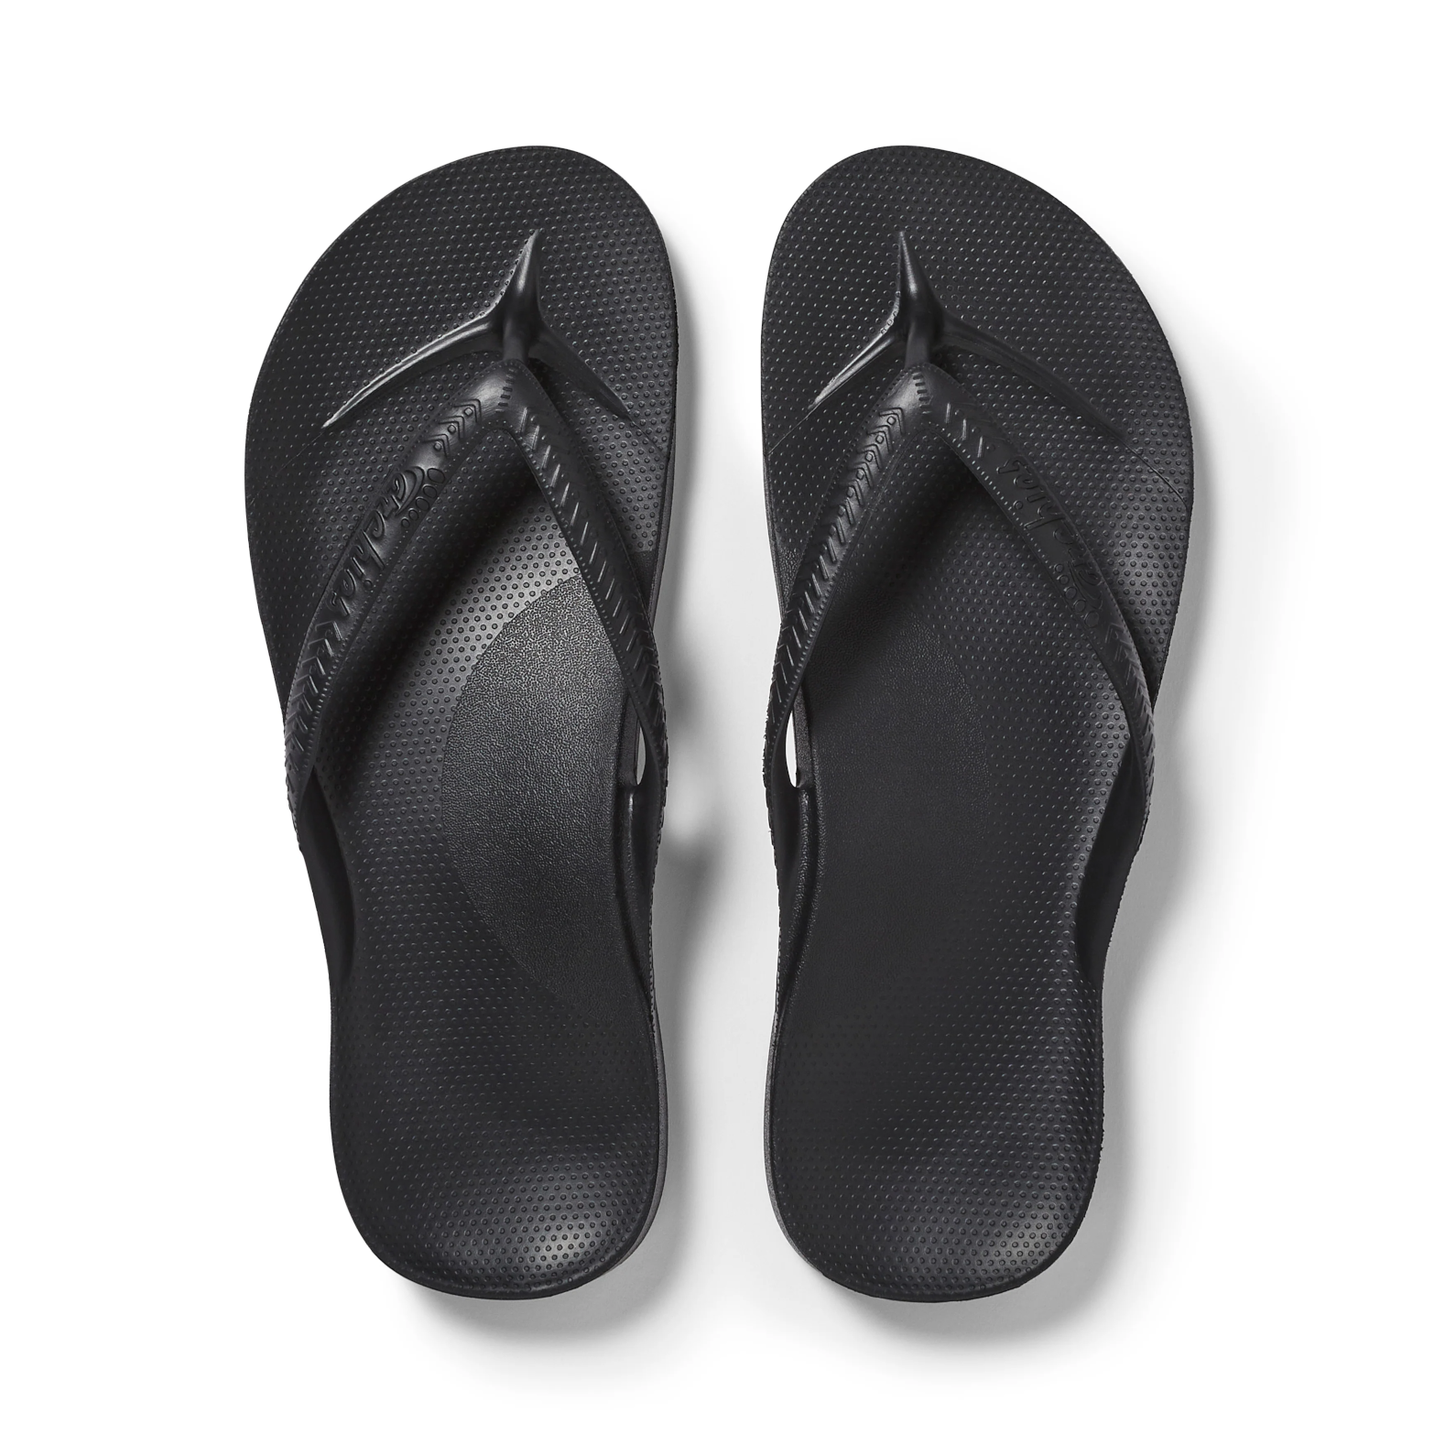 Arch Support Jandals Black